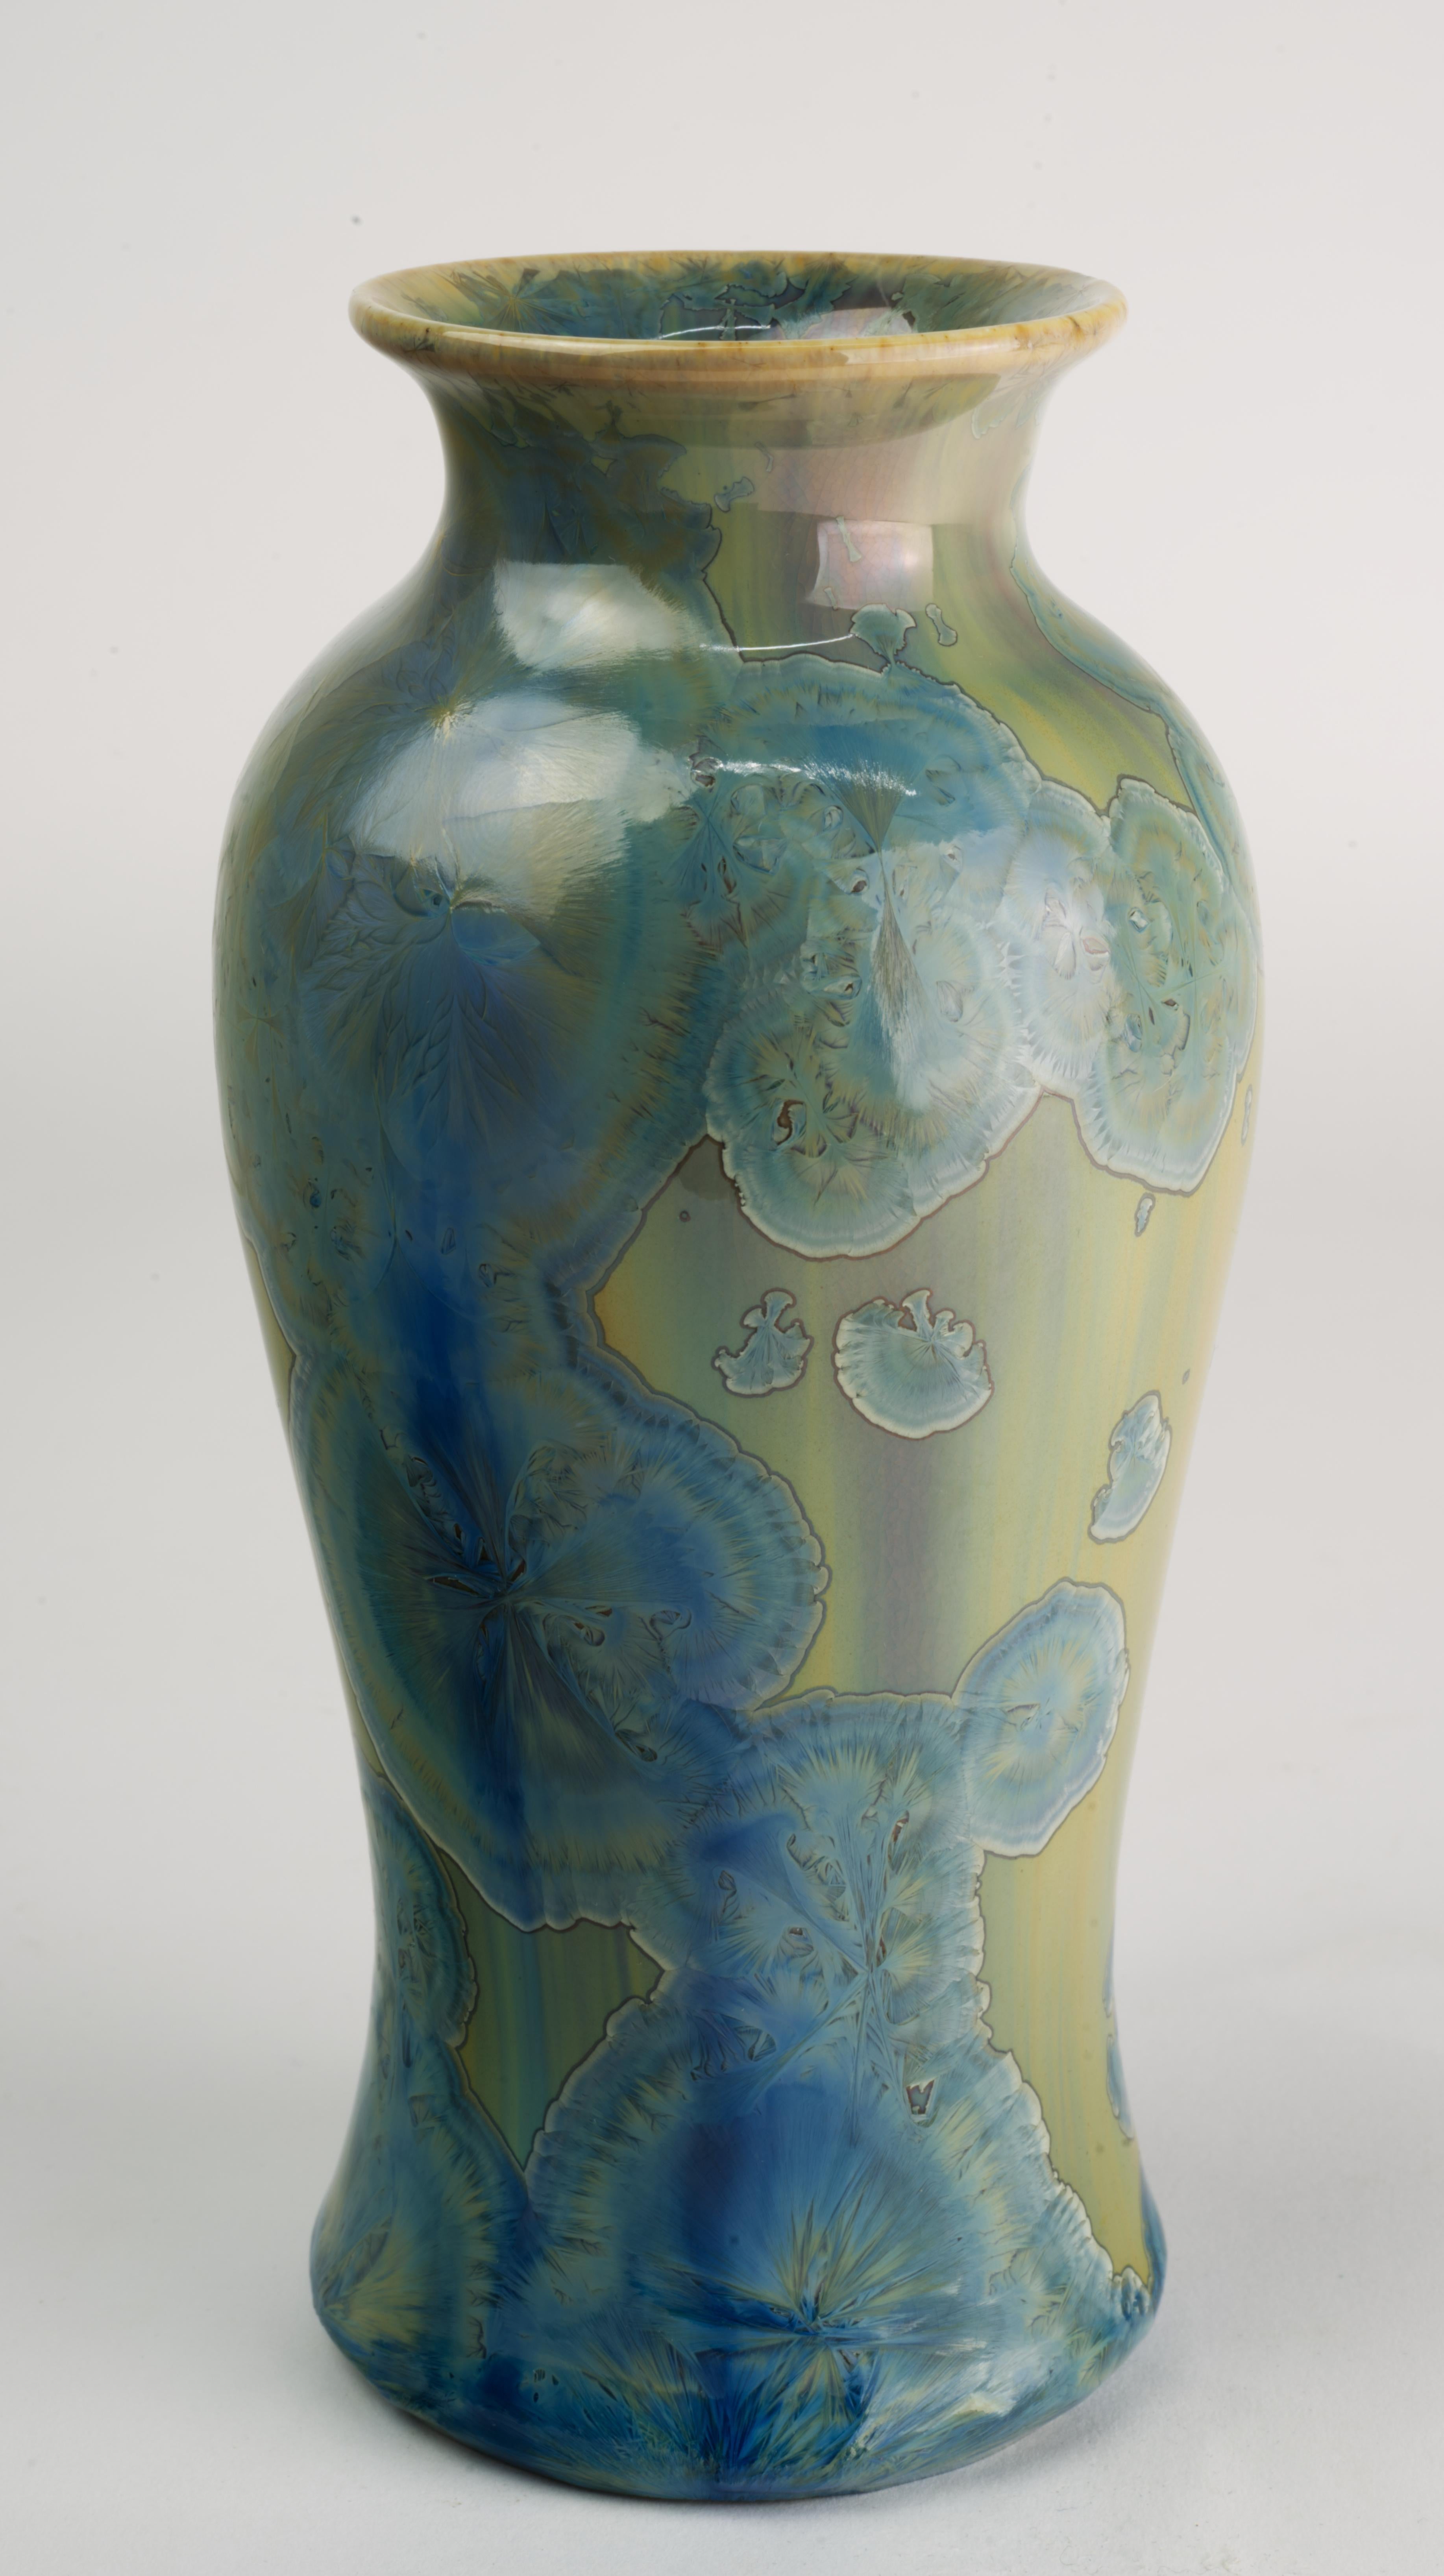  Vintage art studio pottery ceramic vase is decorated with crystalline glaze in organic, delicate olive and sky-blue palette. The vase was hand thrown on a wheel; blue color crystals on olive colored base were grown in a kiln during a very long,